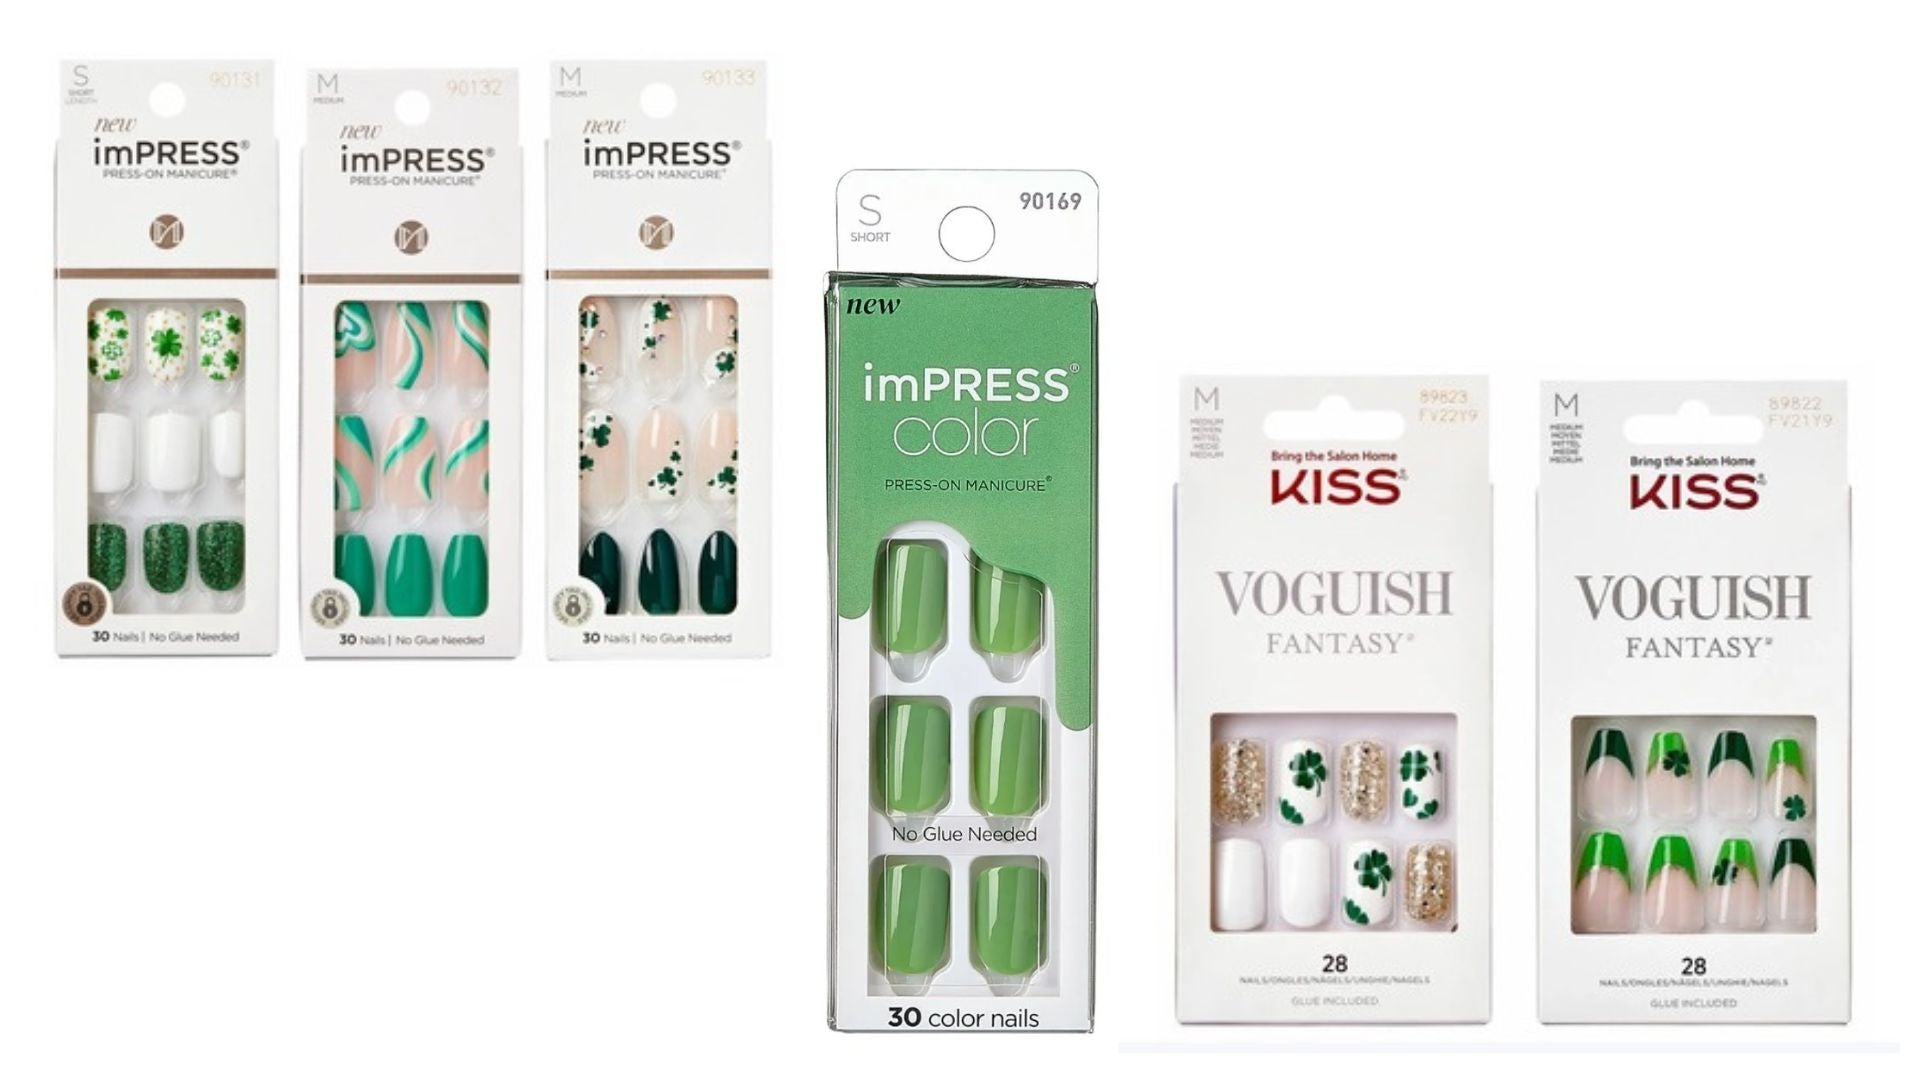 review, photos, ingredients, trends, nails, kiss, impress, press-on nails, st. patrick's day nails, best press-on nails, best drugstore press-on nails, popular st. patrick's day nail looks